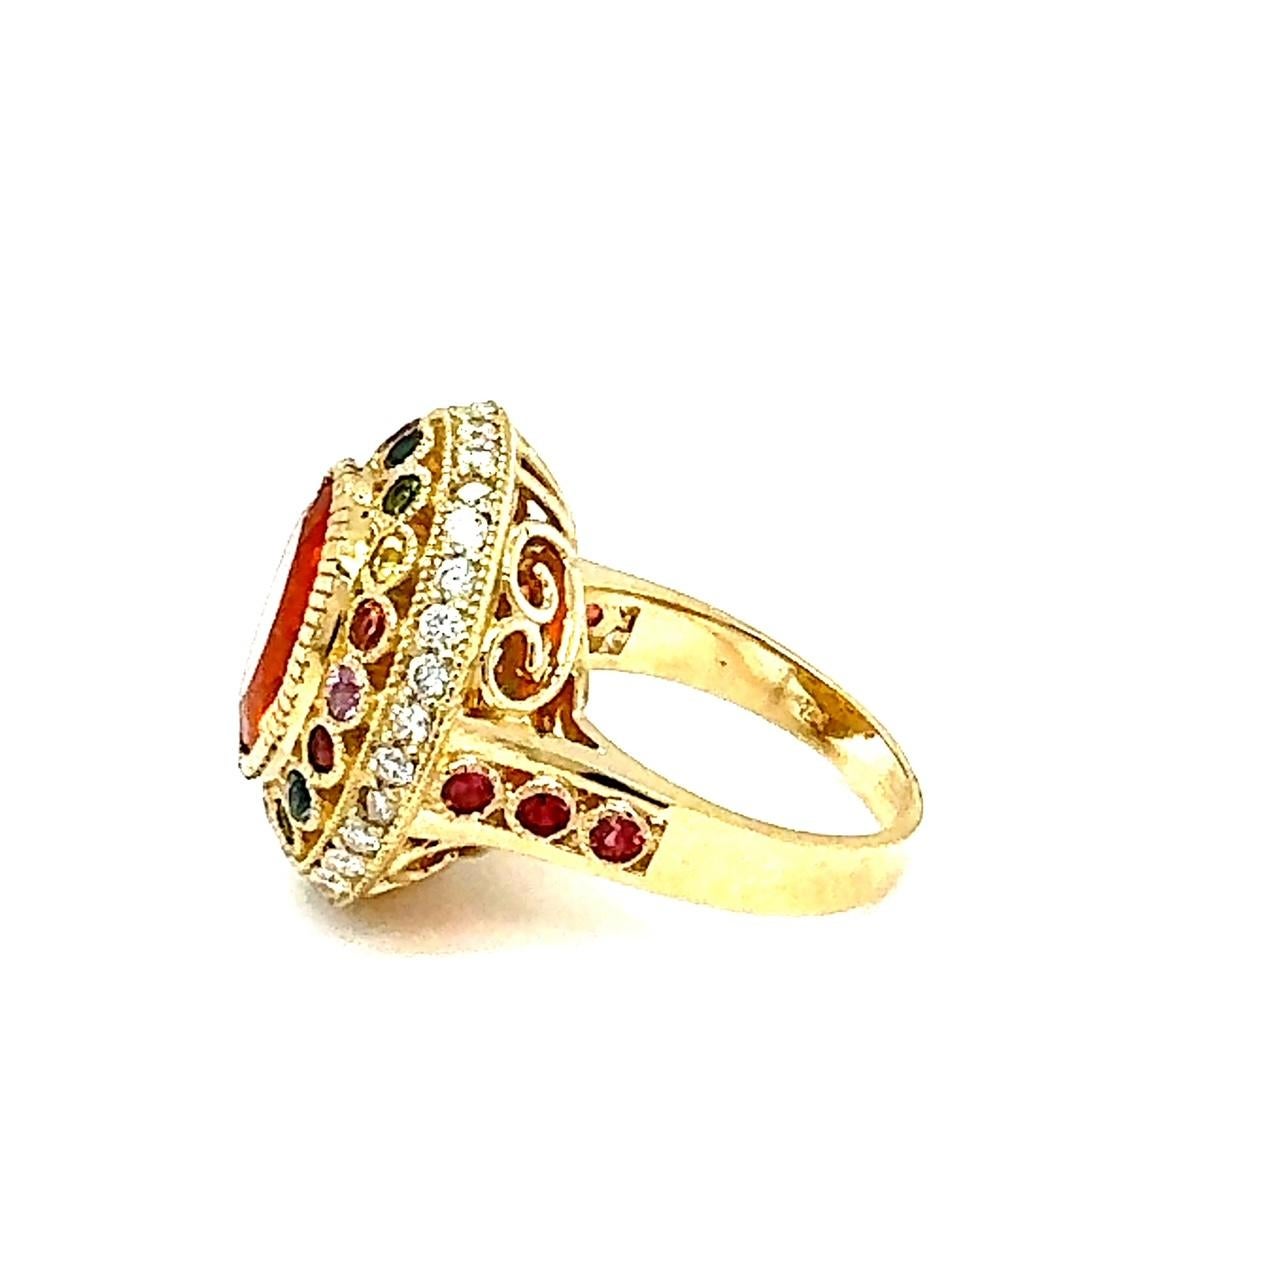 5.14 Carat Natural Fire Opal Sapphire and Diamond Yellow Gold Cocktail Ring For Sale 1